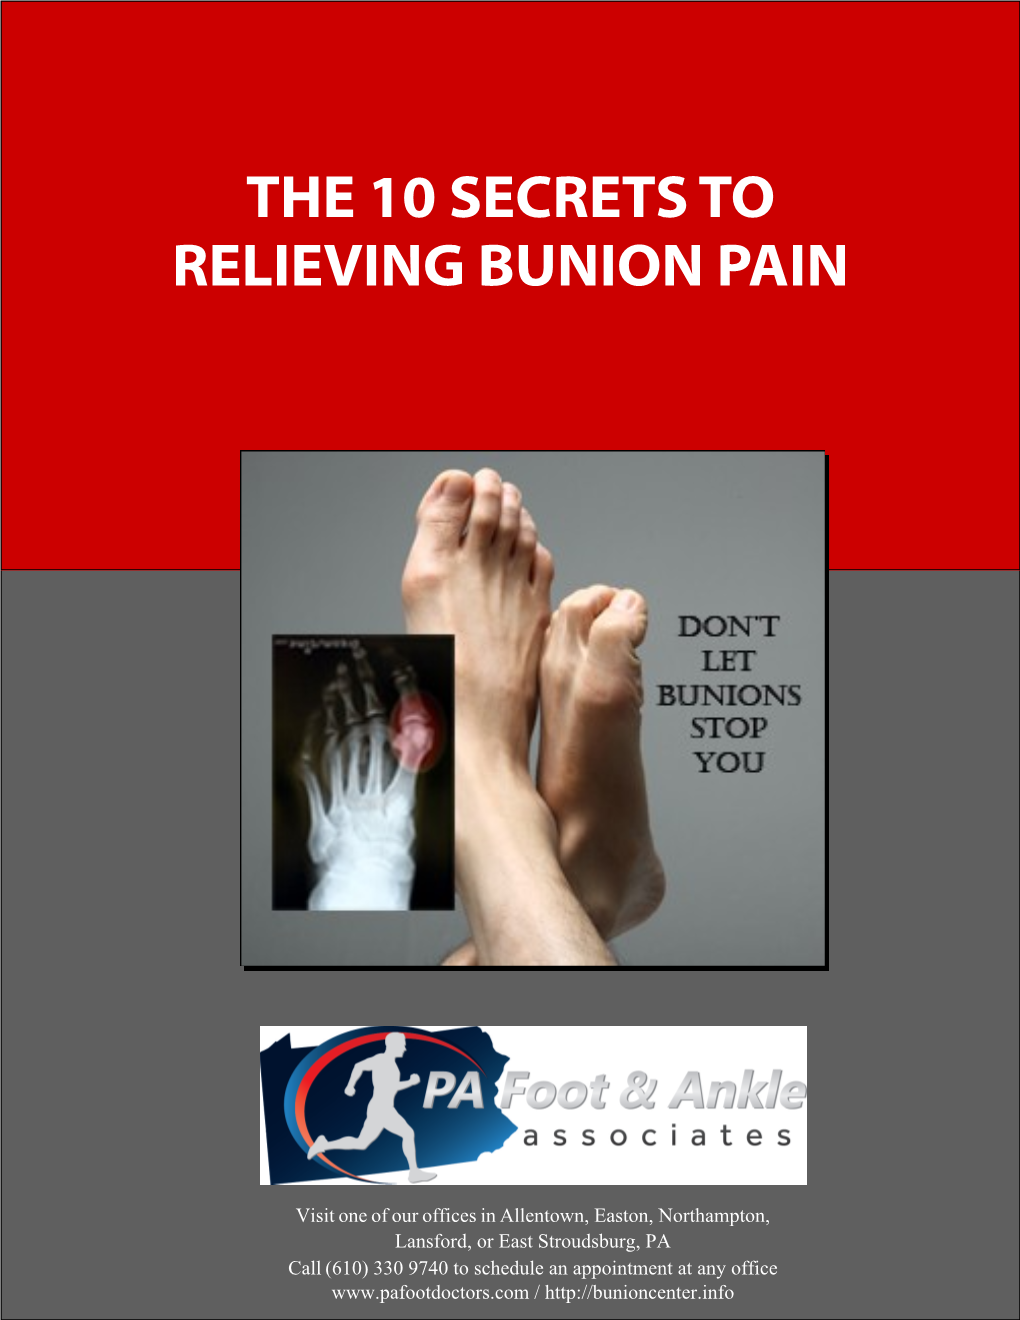 The 10 Secrets to Relieving Bunion Pain